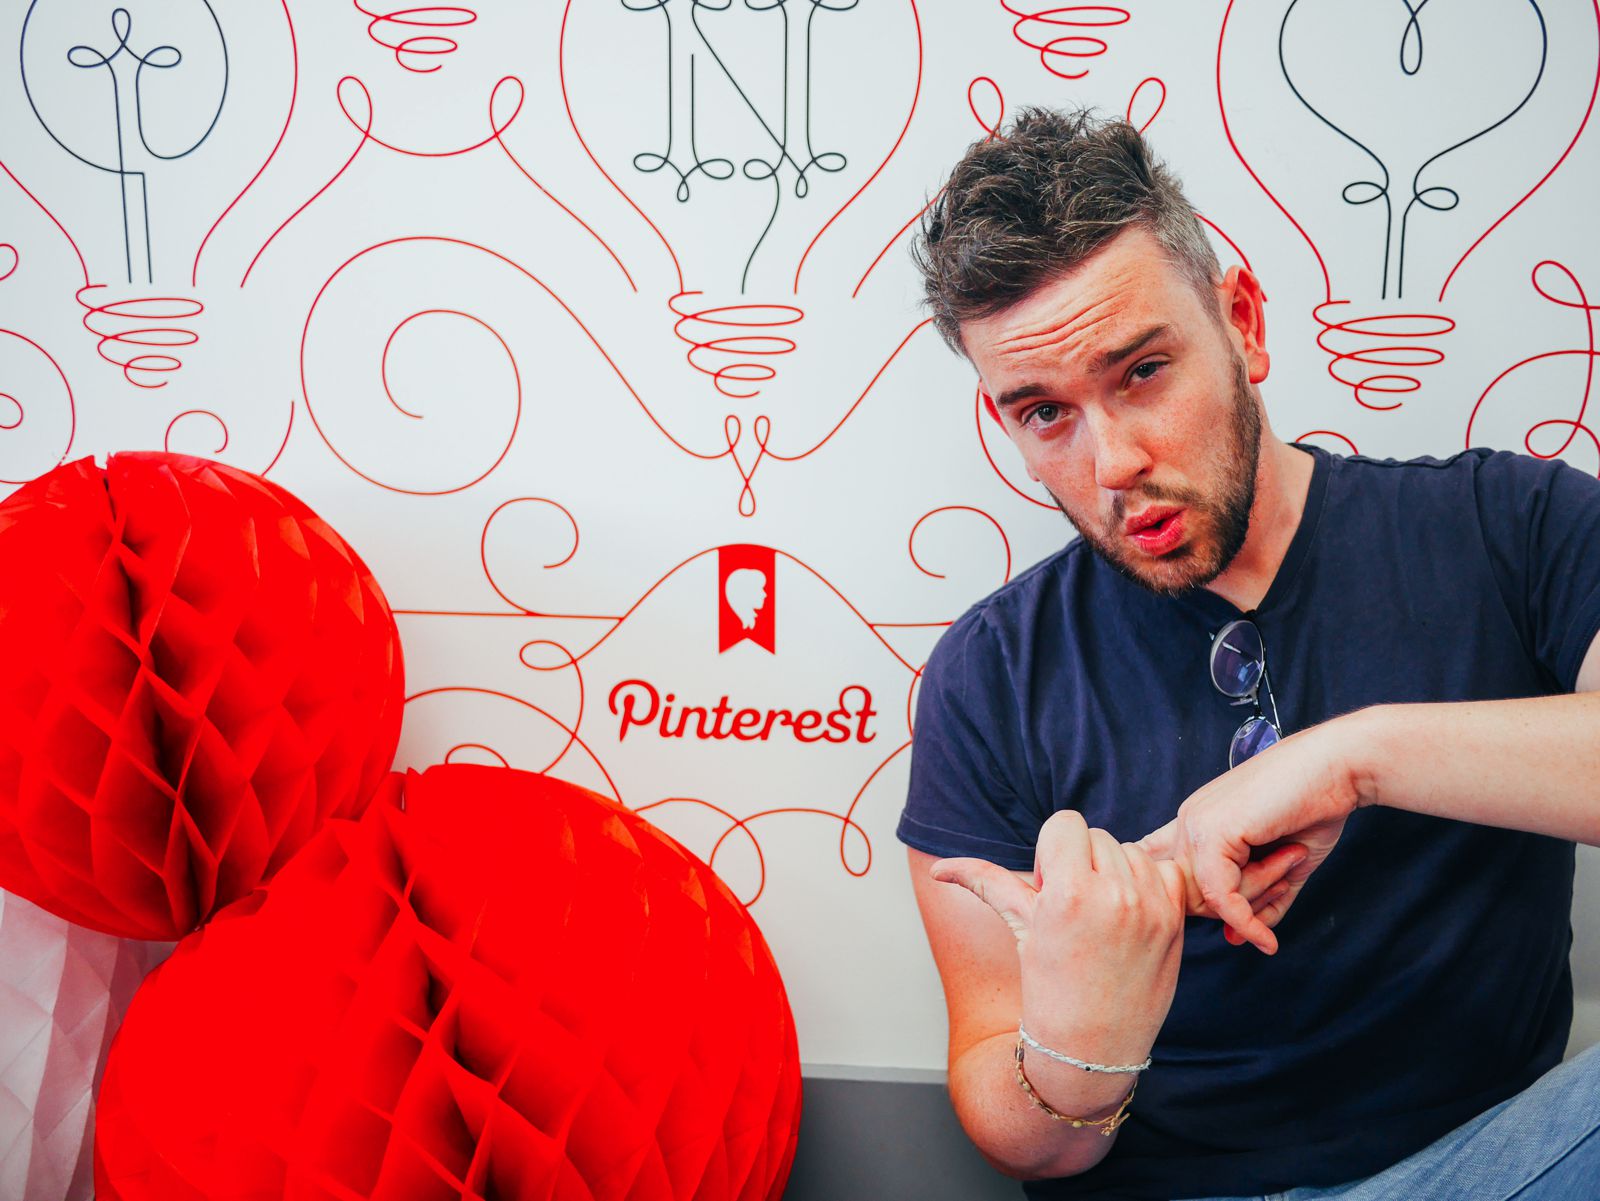 27 Tips And Tricks You Need To Know To Effectively Use Pinterest And Grow Your Blog With Pinterest! (5)